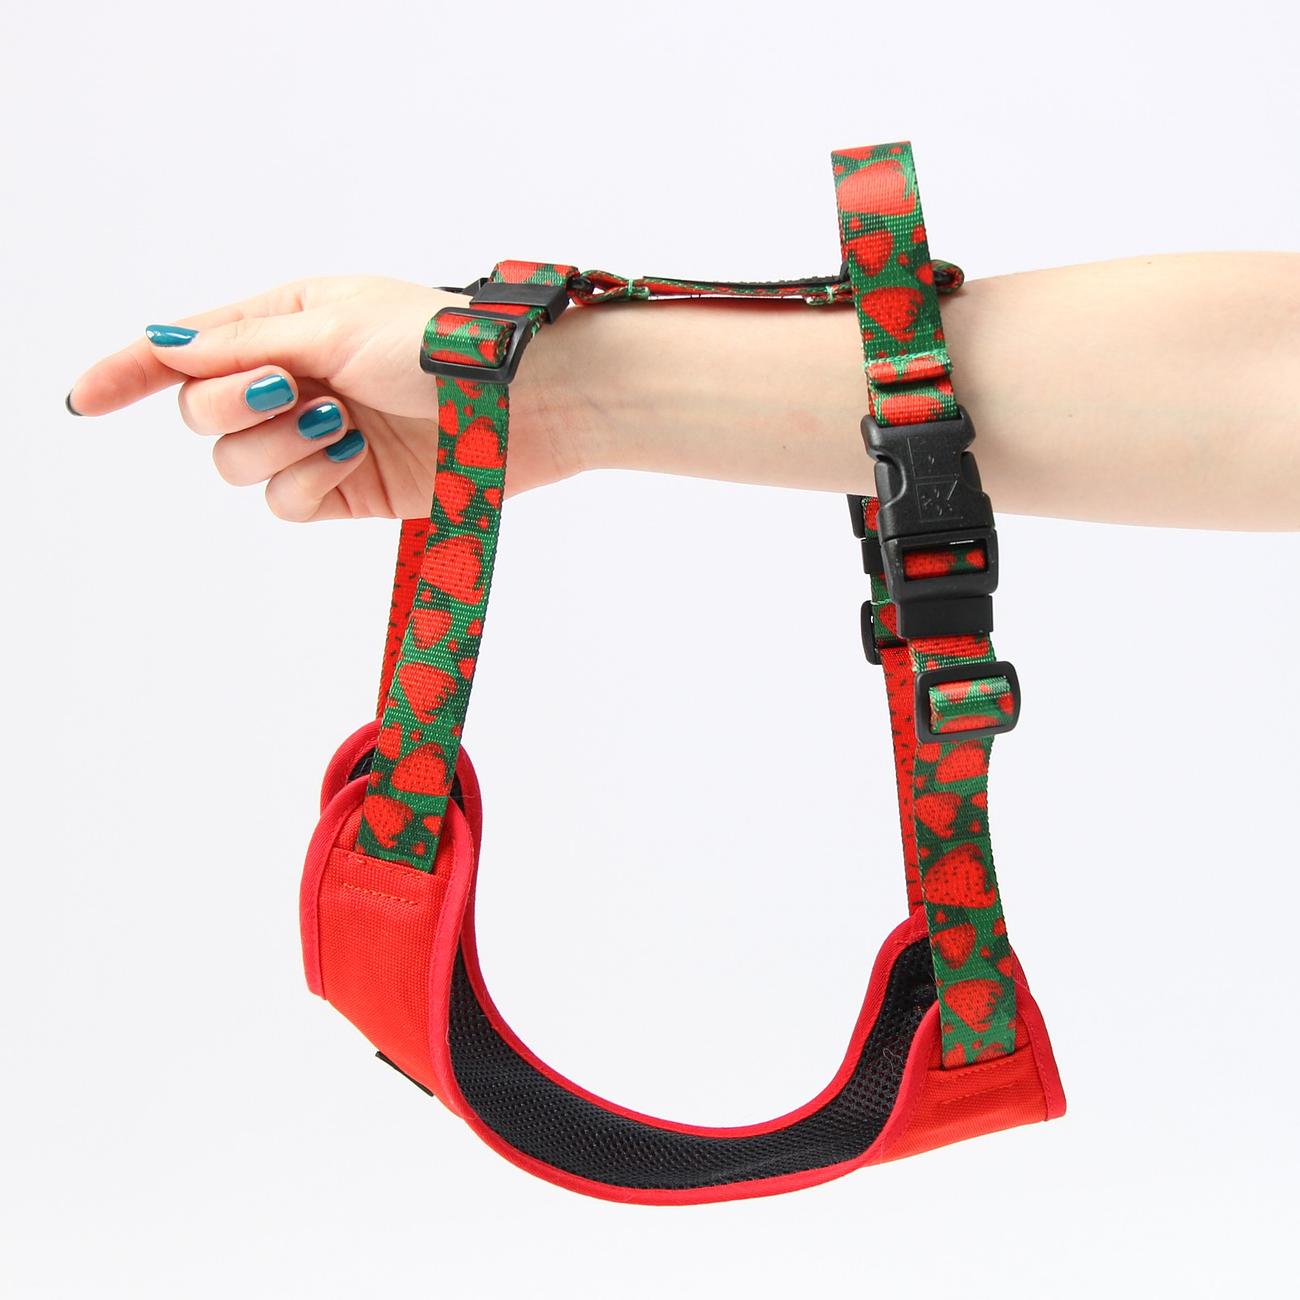 Stay-on pressure-free harness "Strawberry Fields Forever"